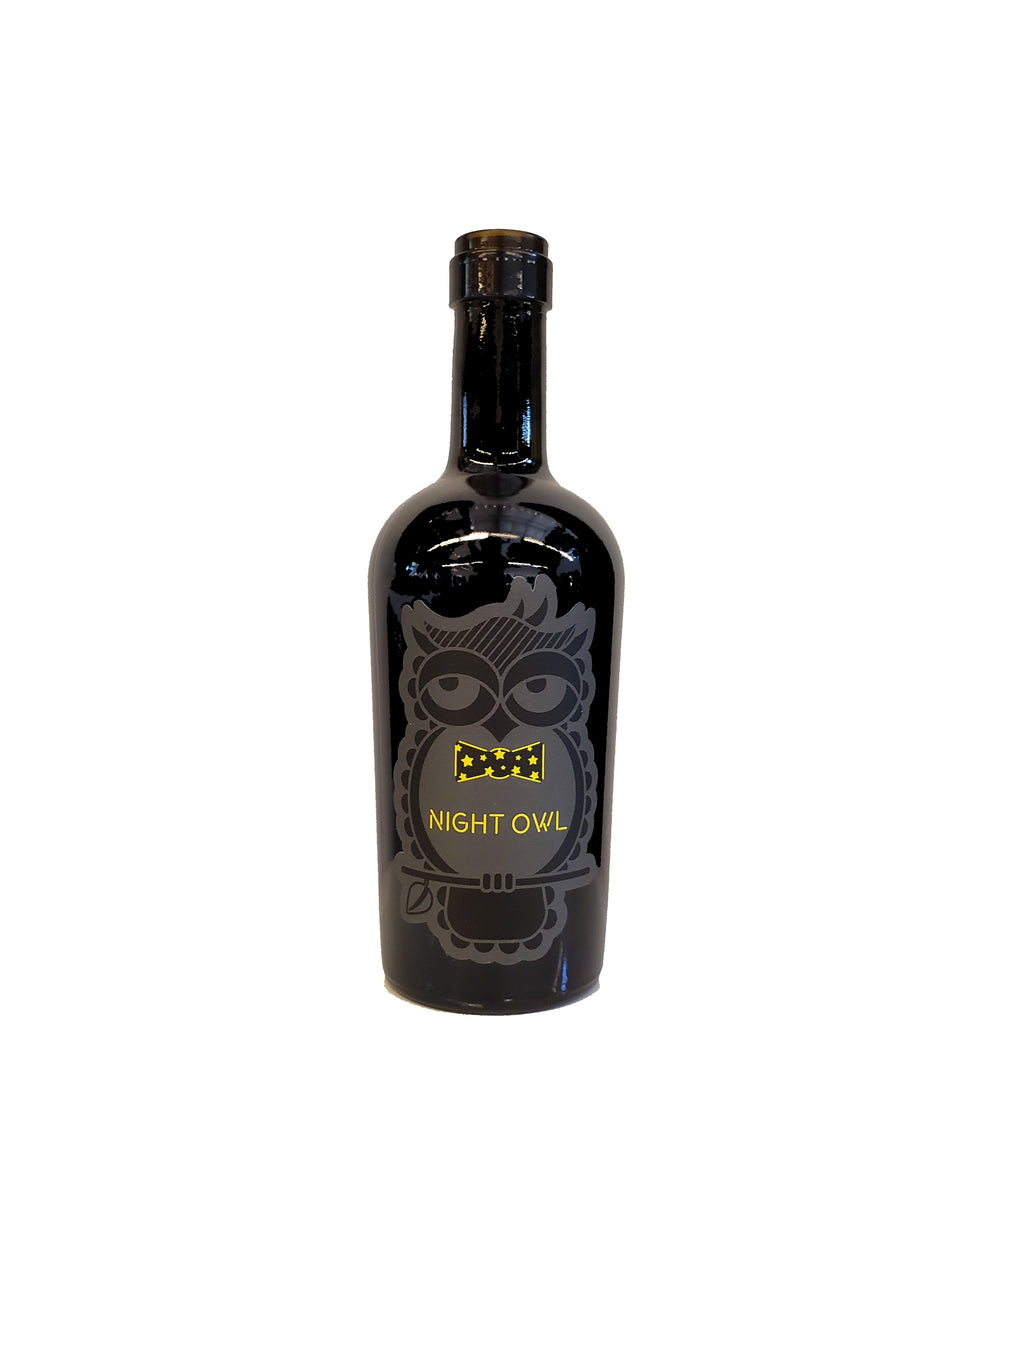 Mini Bordeaux-style bottle with the Wine Snob* Night Owl label showing an owl perched on a stick with a leaf, slightly rolling its eyes, and wearing a black bowtie with yellow stars.